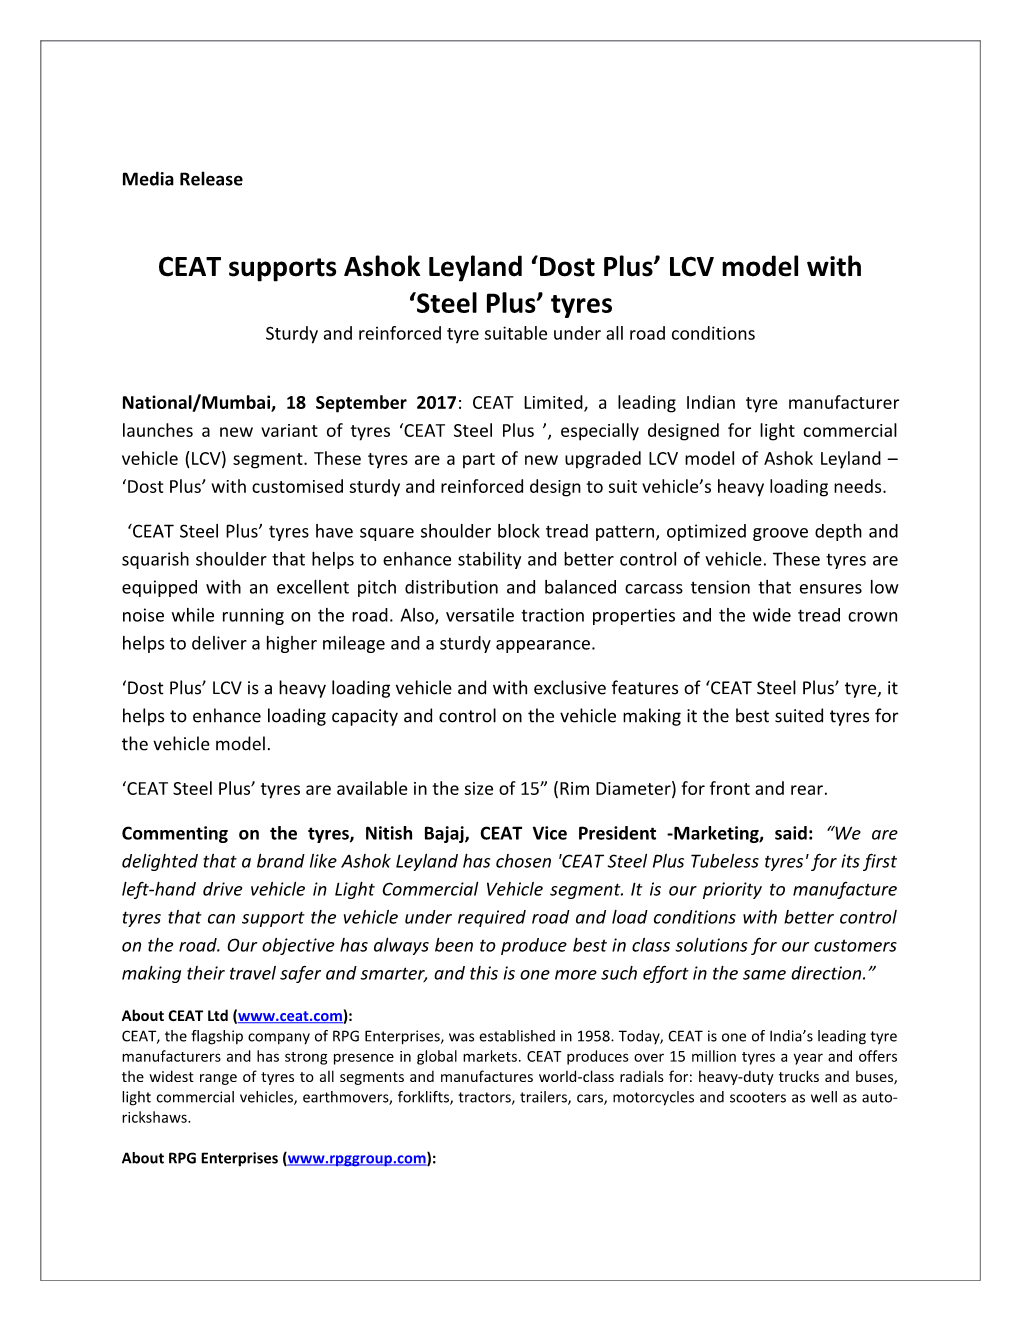 CEAT Supports Ashok Leyland Dostplus LCV Model with Steel Plus Tyres